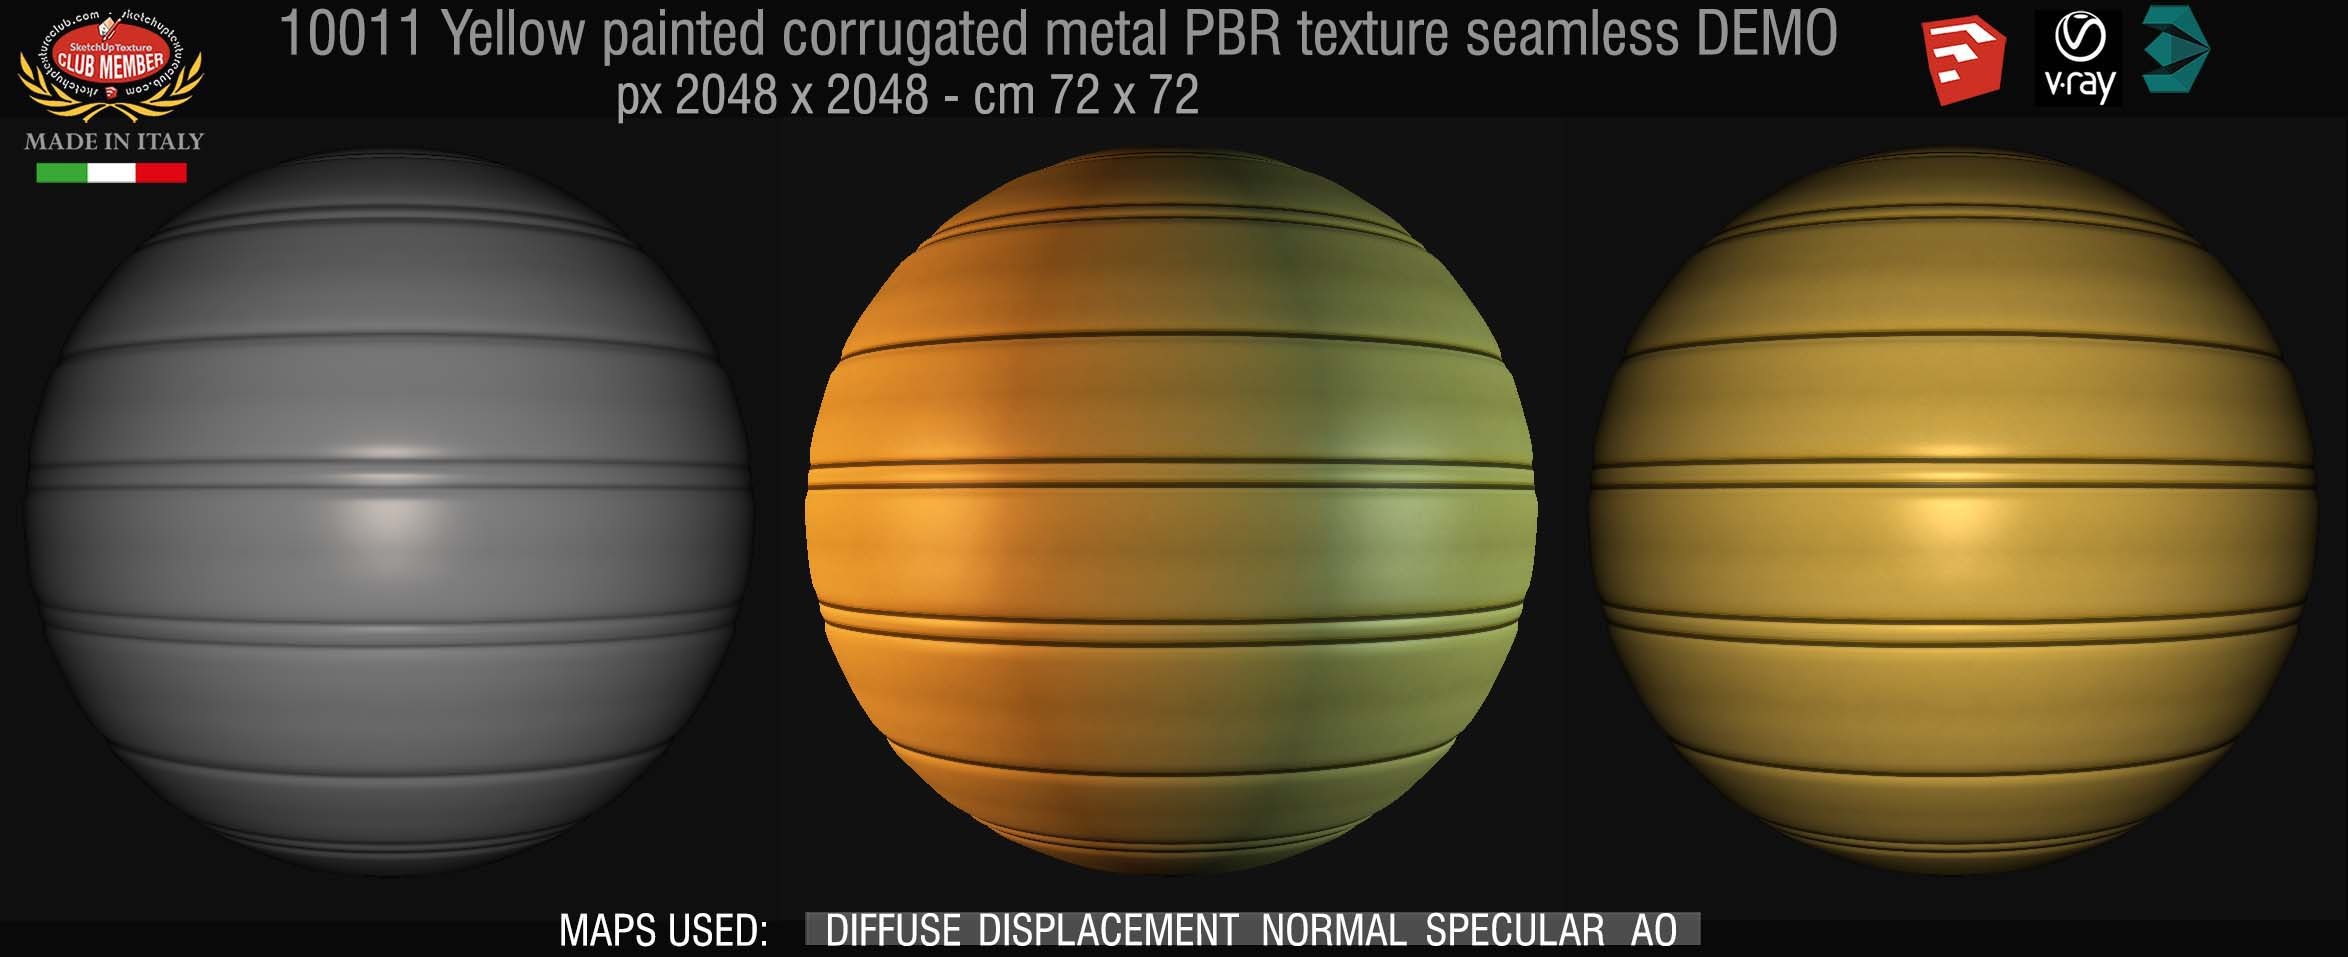 10011 Yellow painted corrugated metal PBR texture seamless DEMO